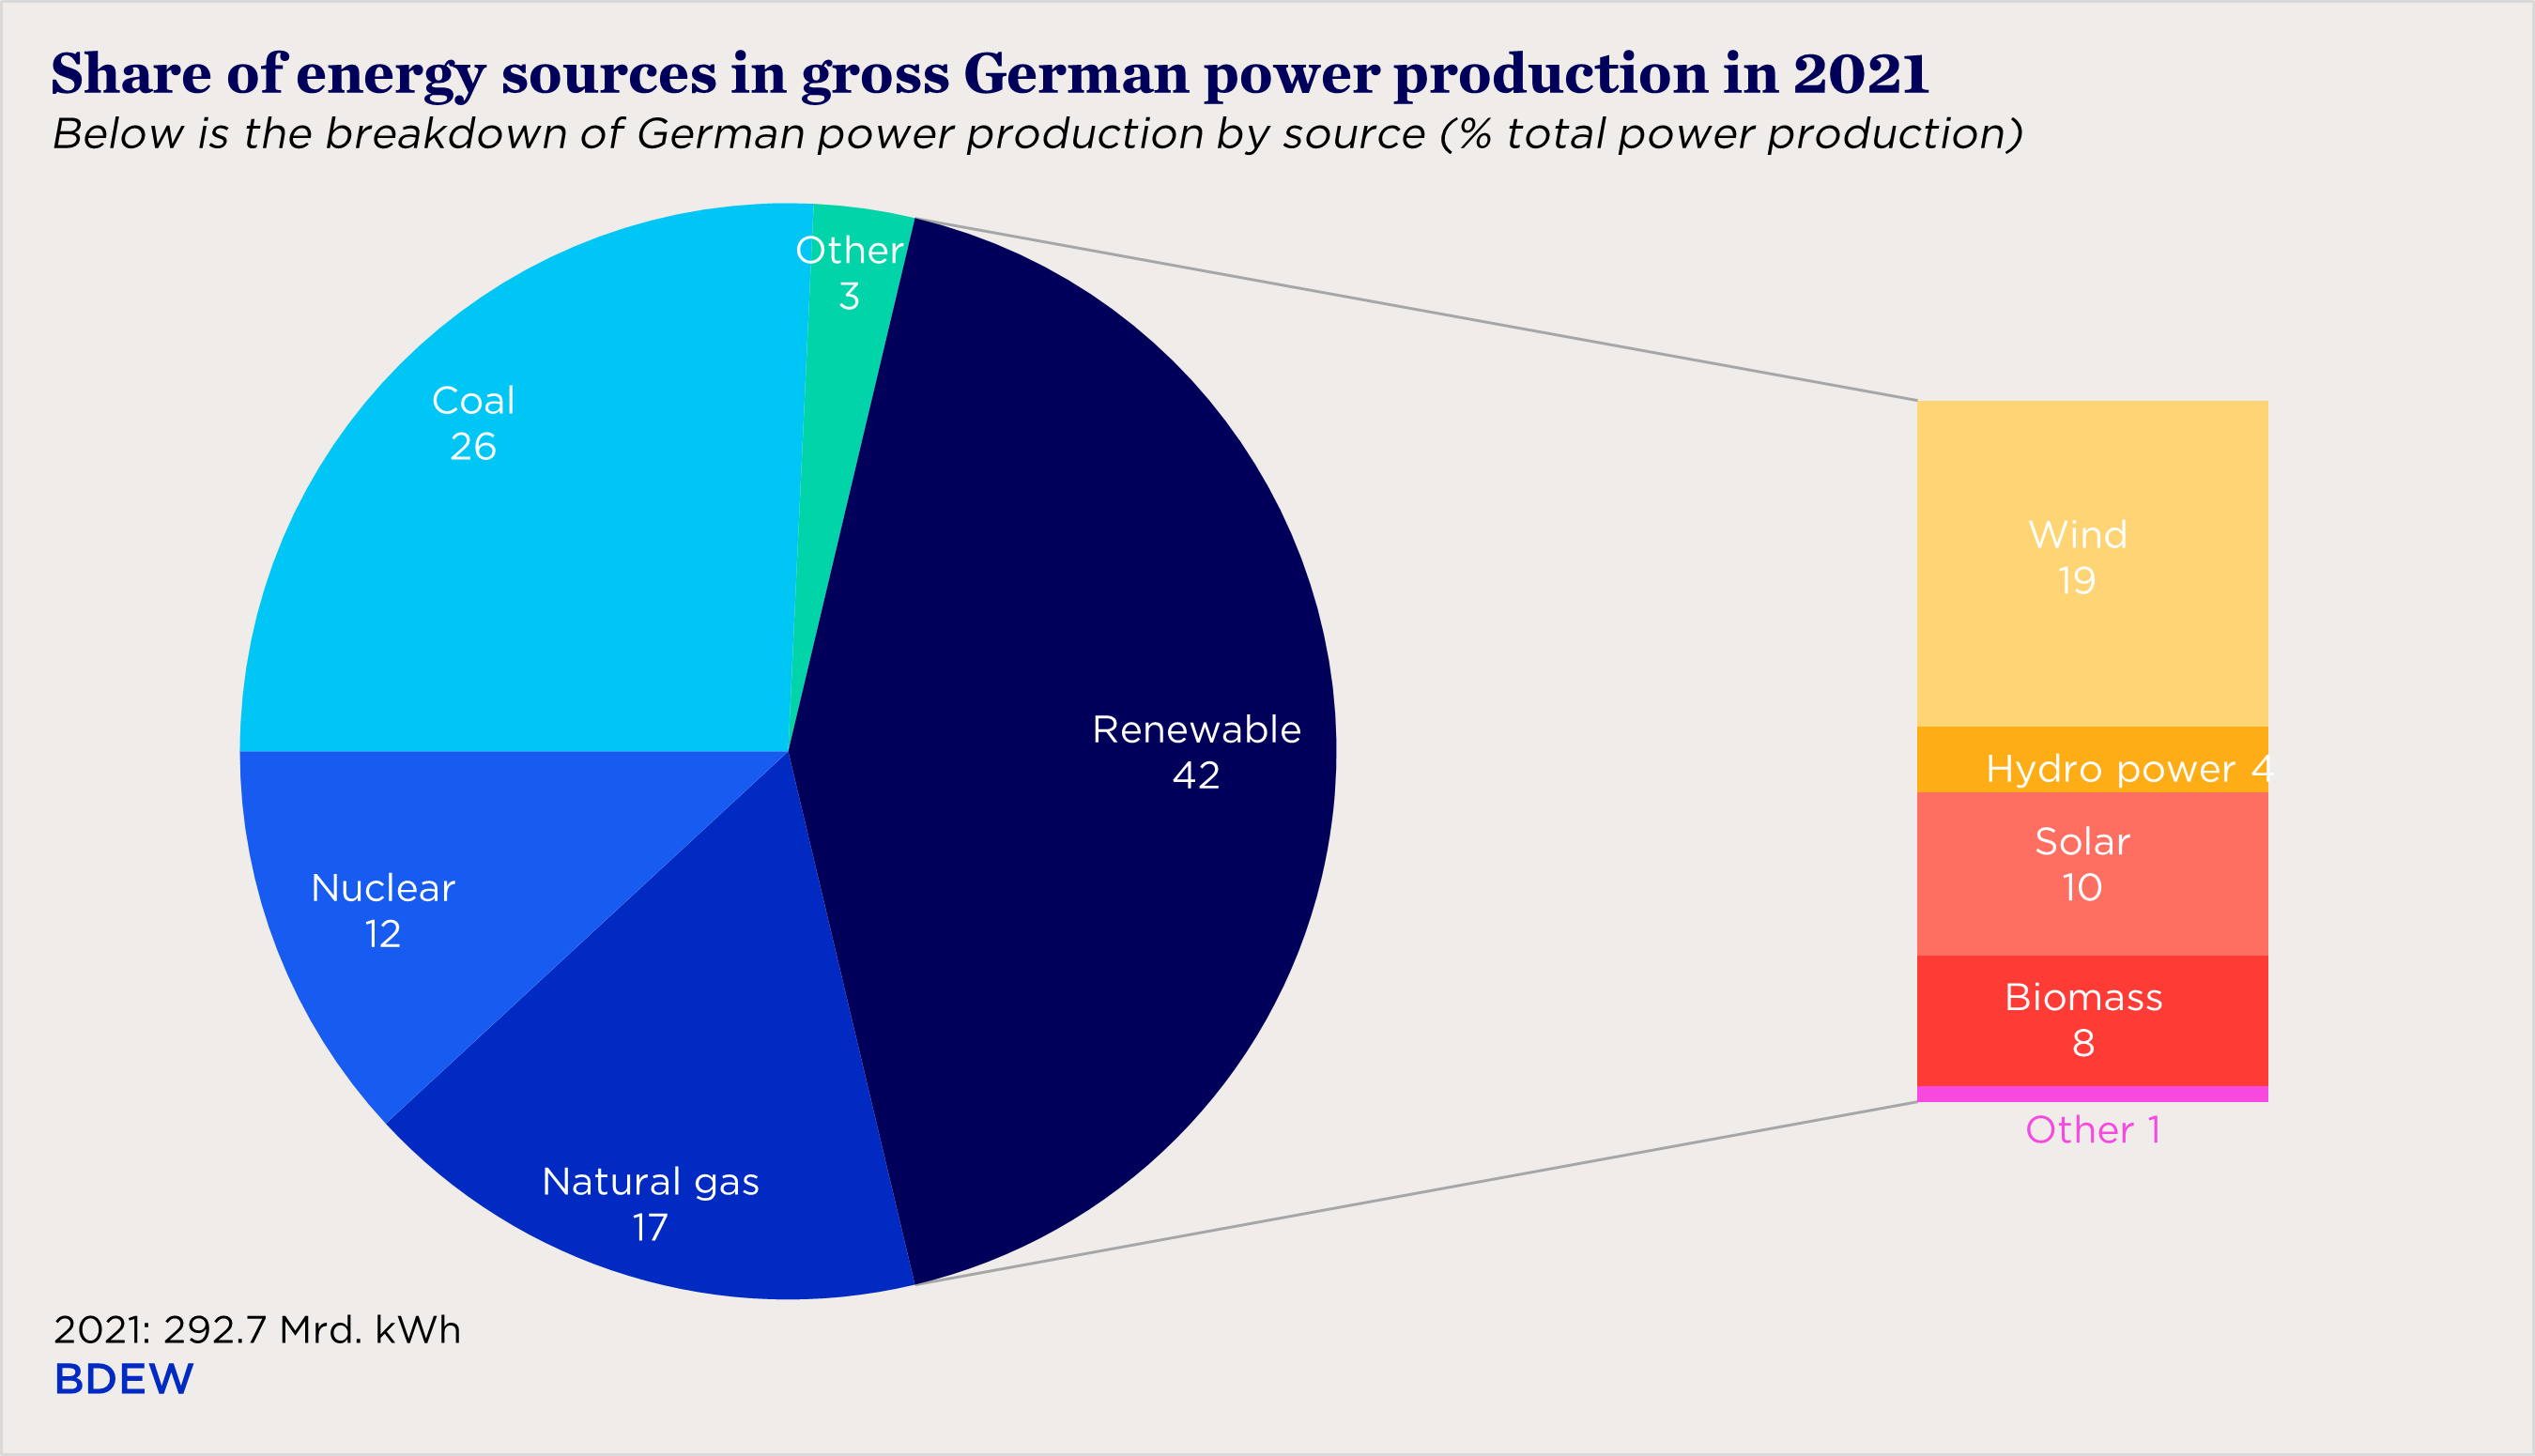 pie chart showing share of energy sources in gross German power production